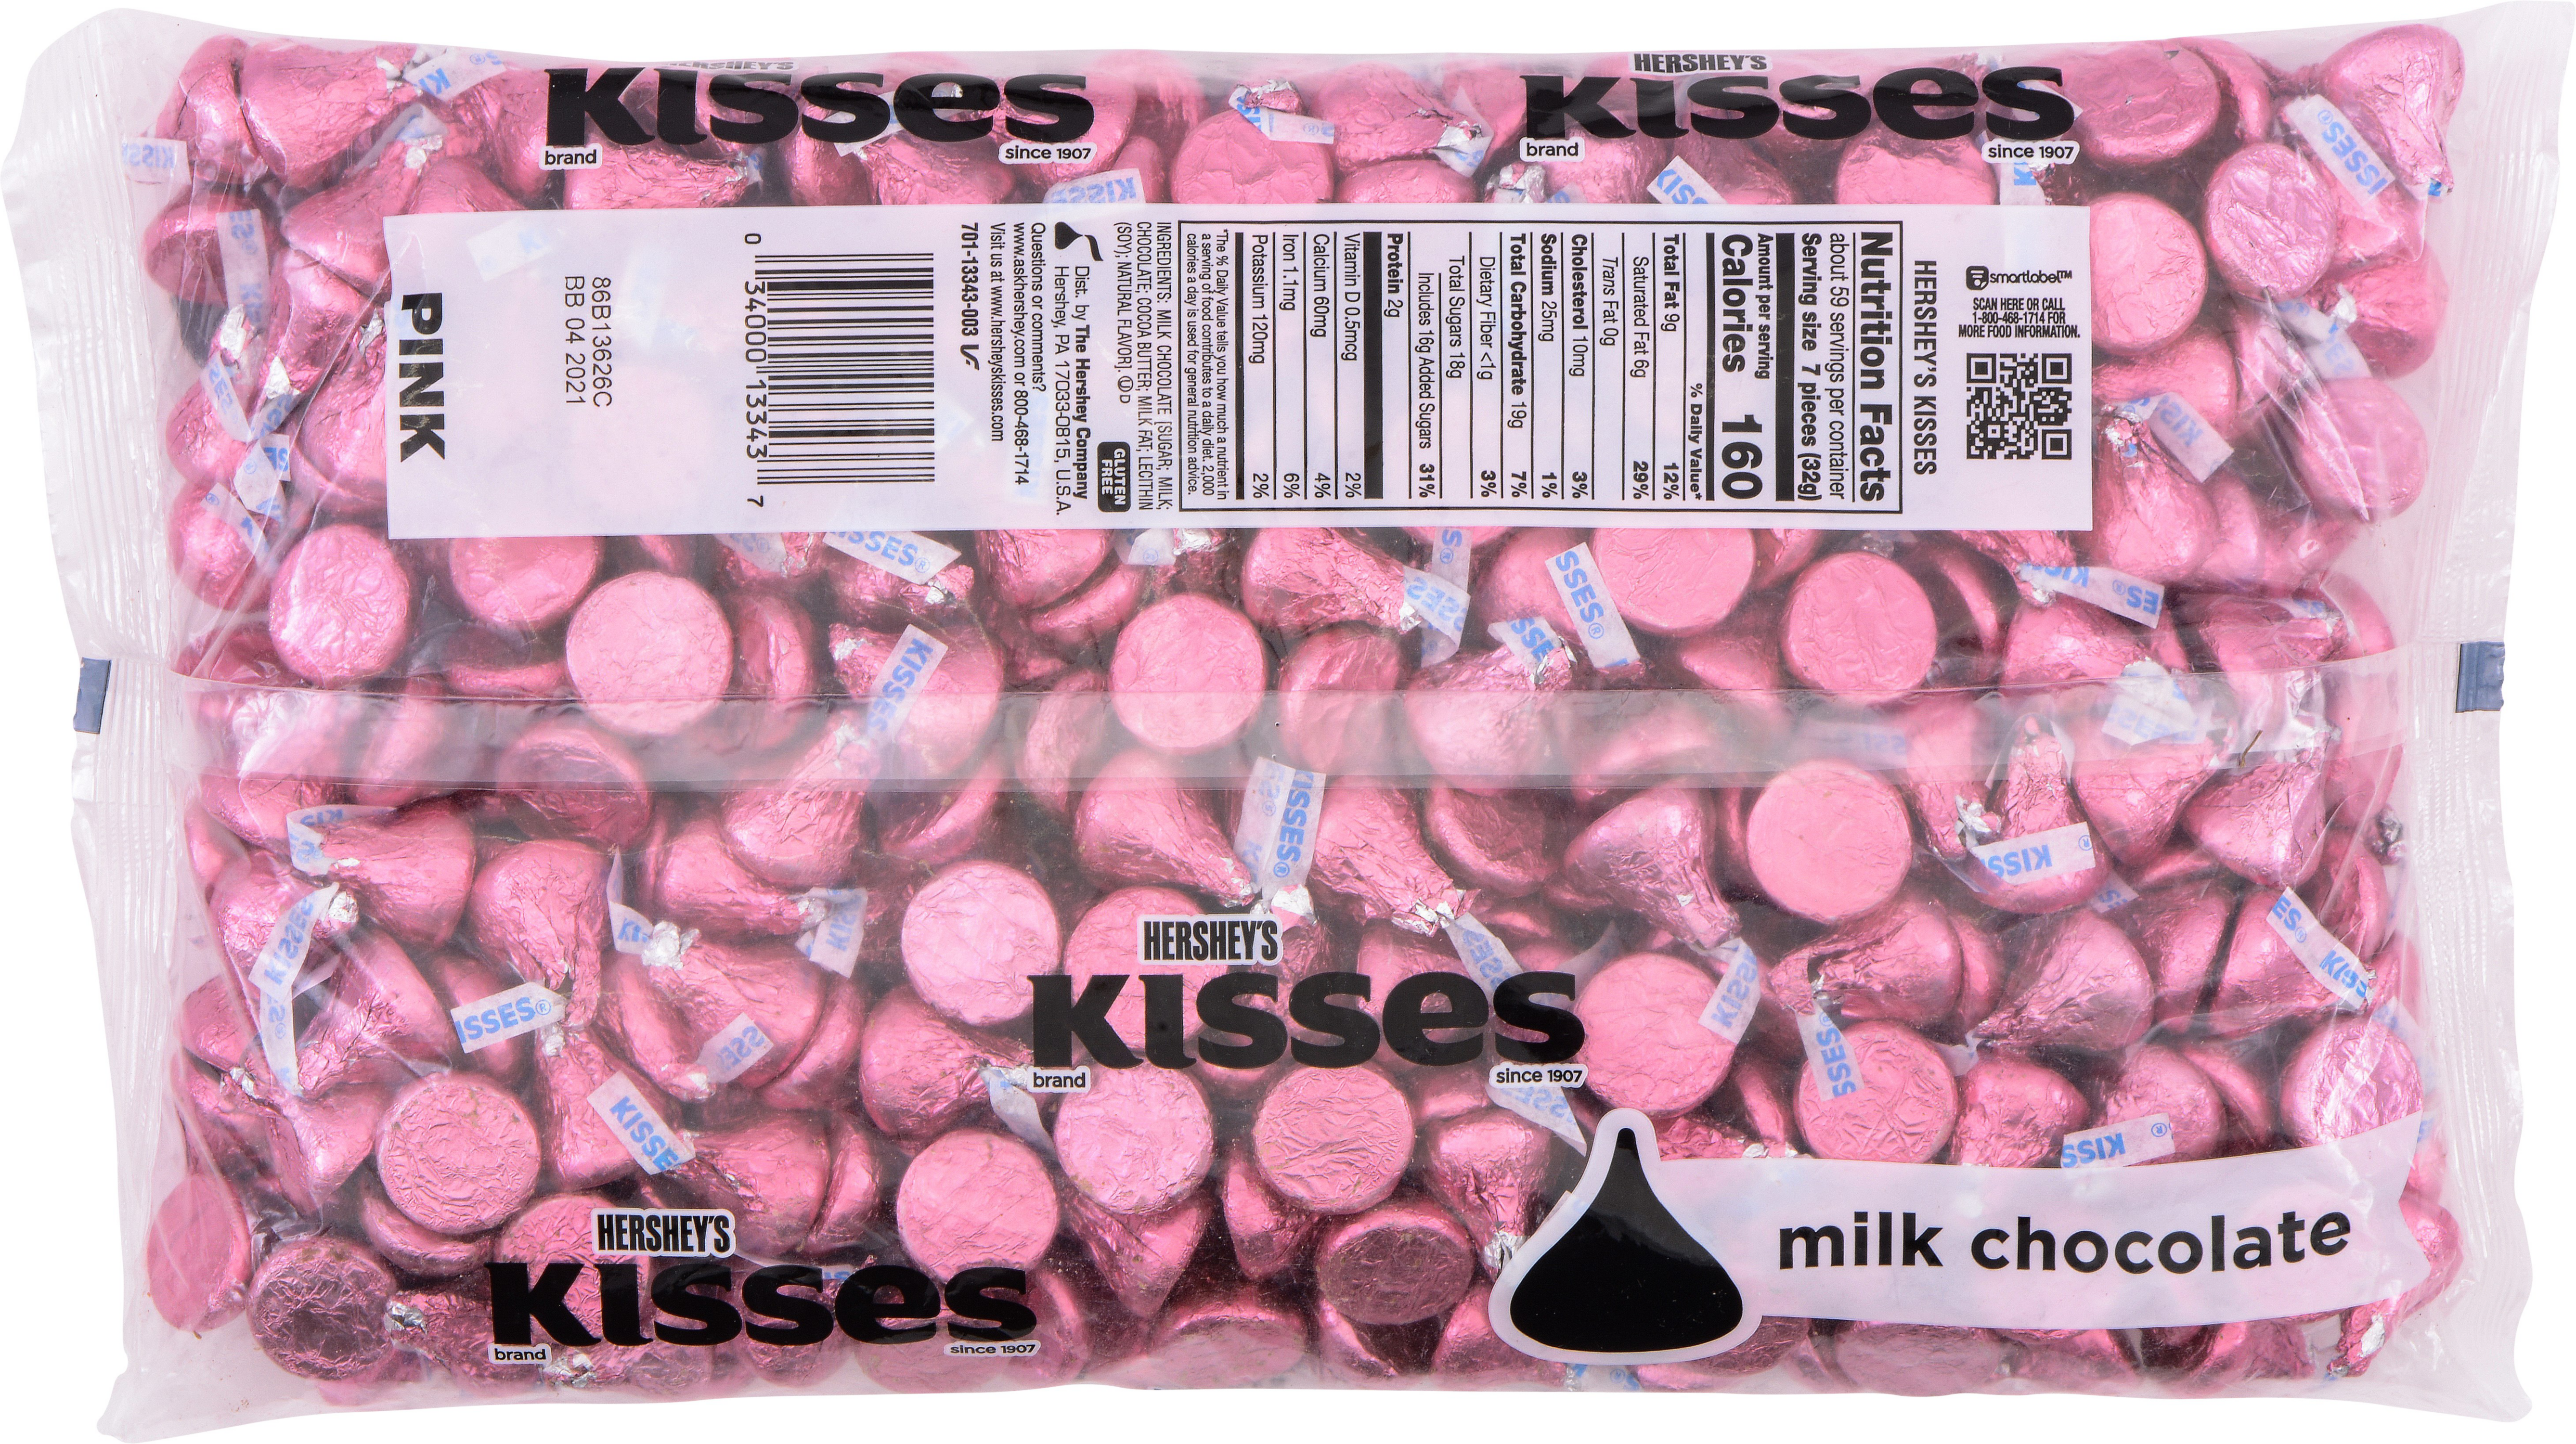 HERSHEY'S KISSES Pink Foil Milk Chocolate Candy, 66.7 oz bag - Back of Package